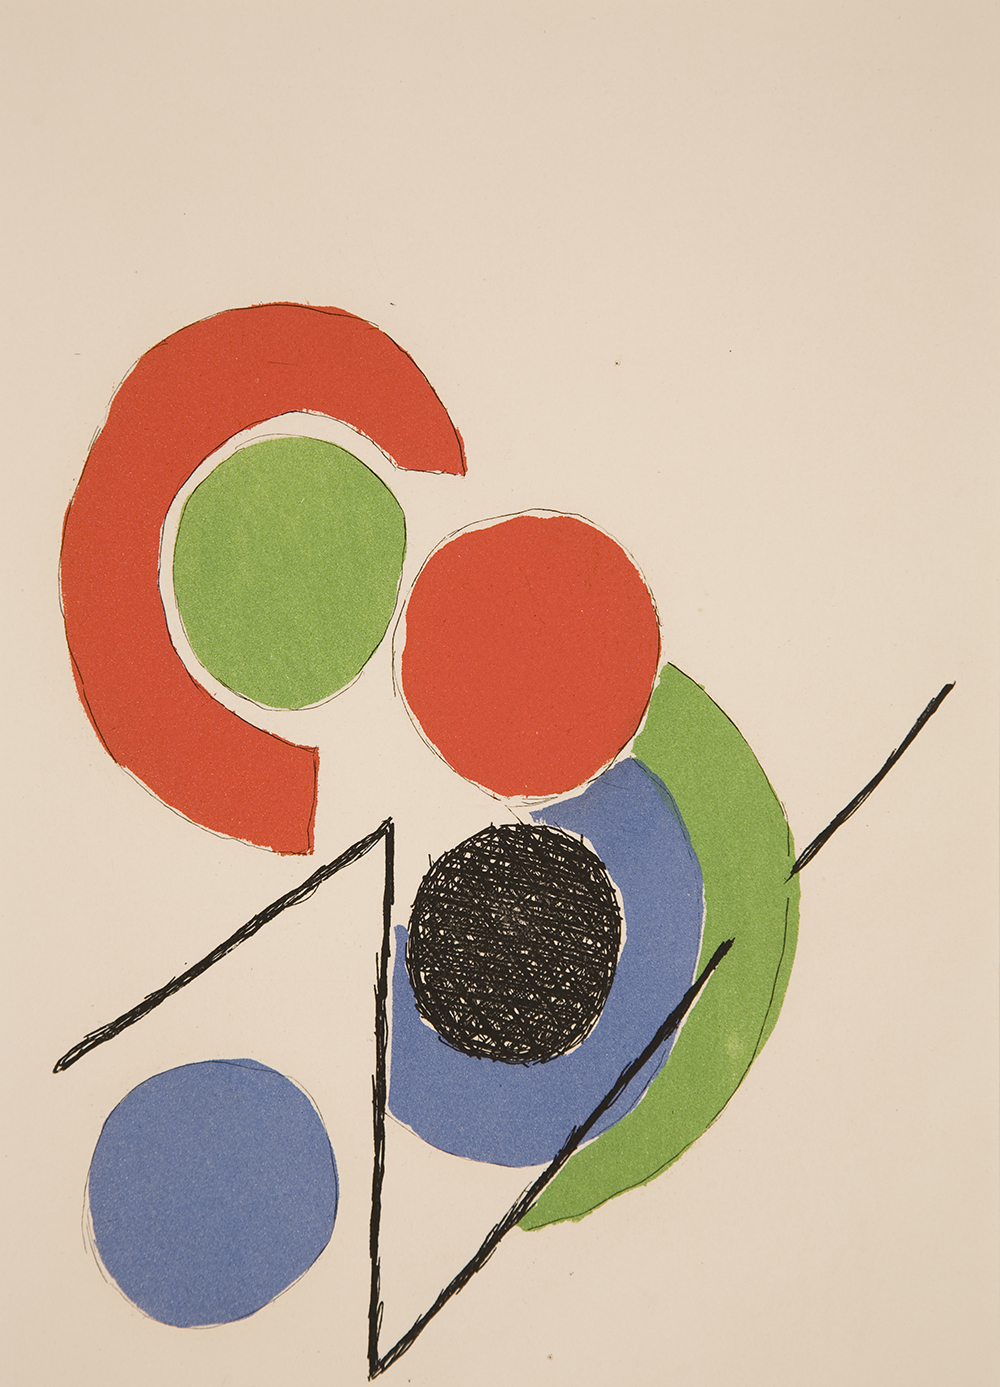 an etching of circles, arcs and lines. Four circles are scattered on the lower half of the paper, each one a different color: green, red, black, and blue. A red, green and blue arc surround the circles. A black line in the shape of a “Z” slants across the page among the circles and arcs. 